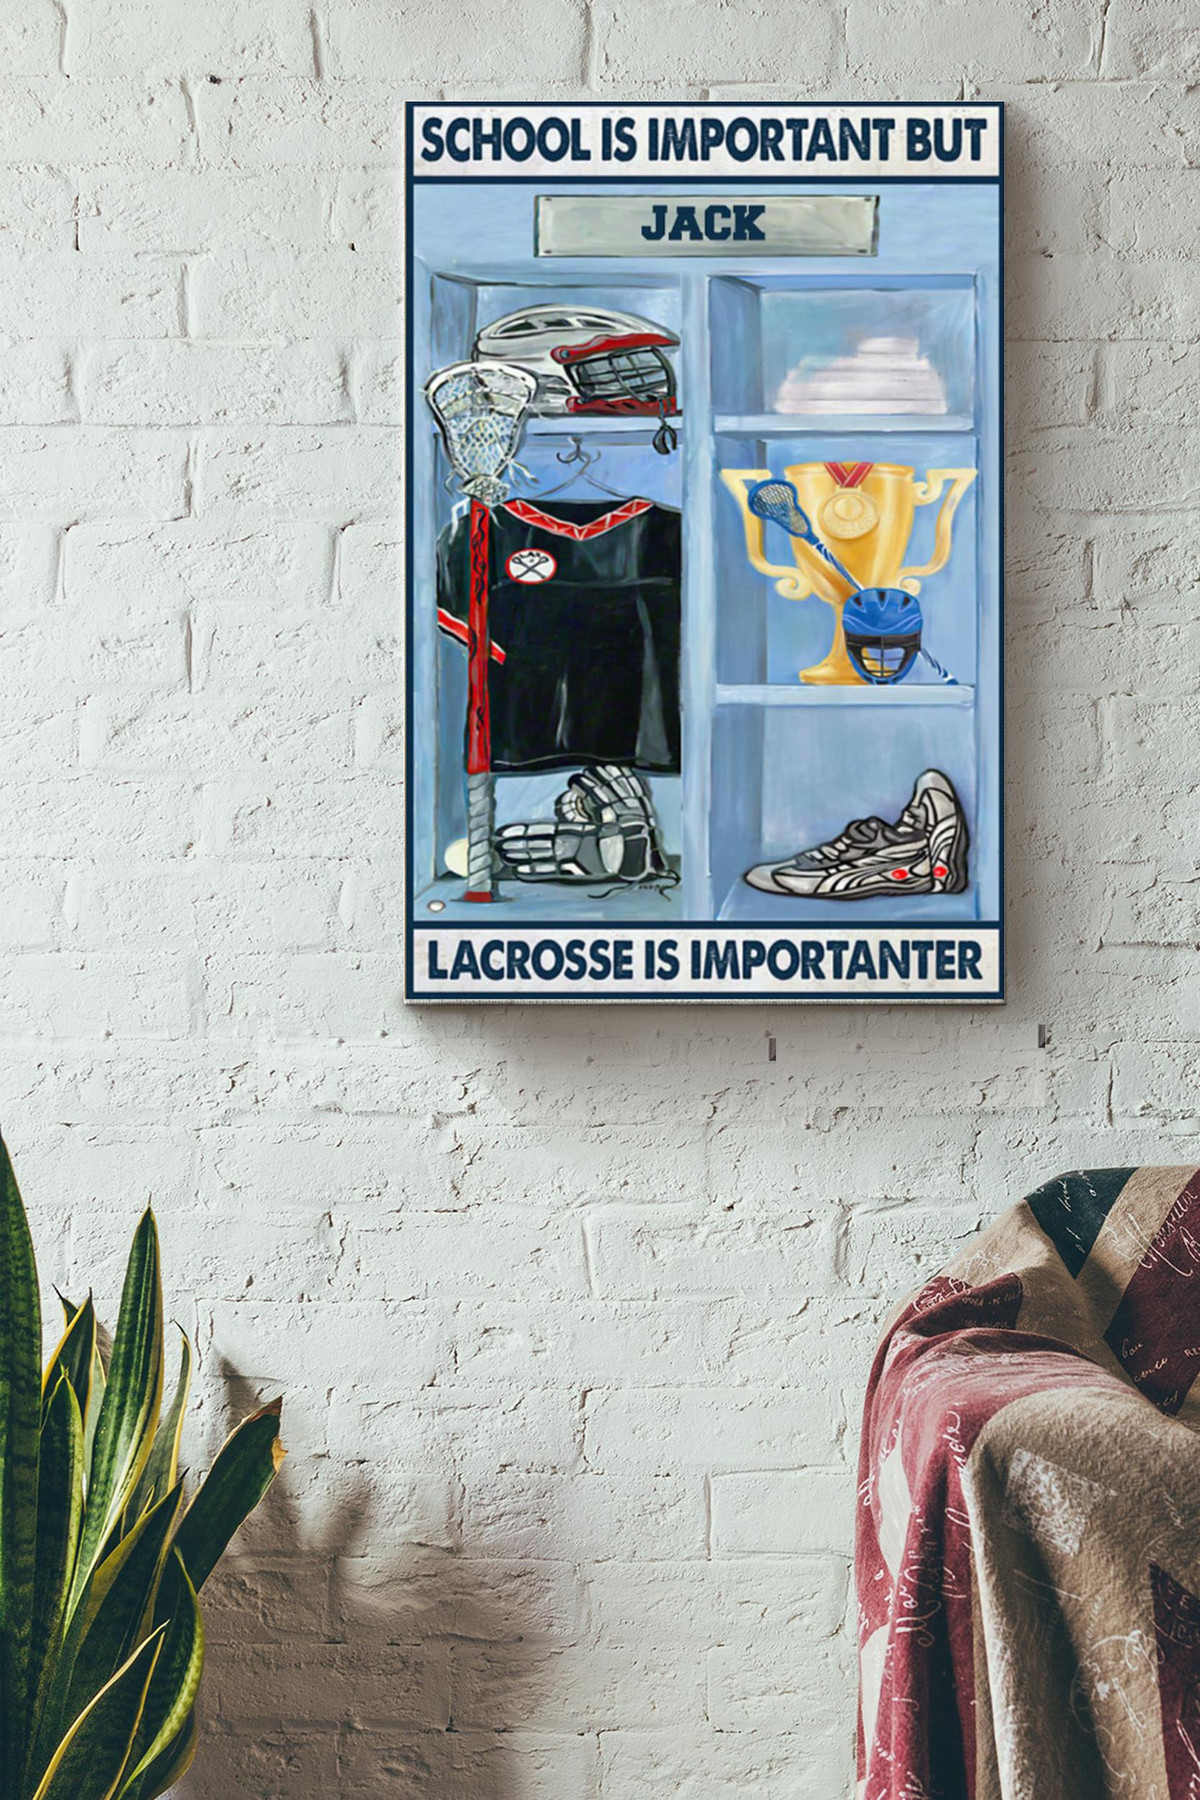 School Is Important But Lacrosse Is Importanter Win The First Place Canvas Painting Ideas, Canvas Hanging Prints, Gift Idea Framed Prints, Canvas Paintings Wrapped Canvas 8x10